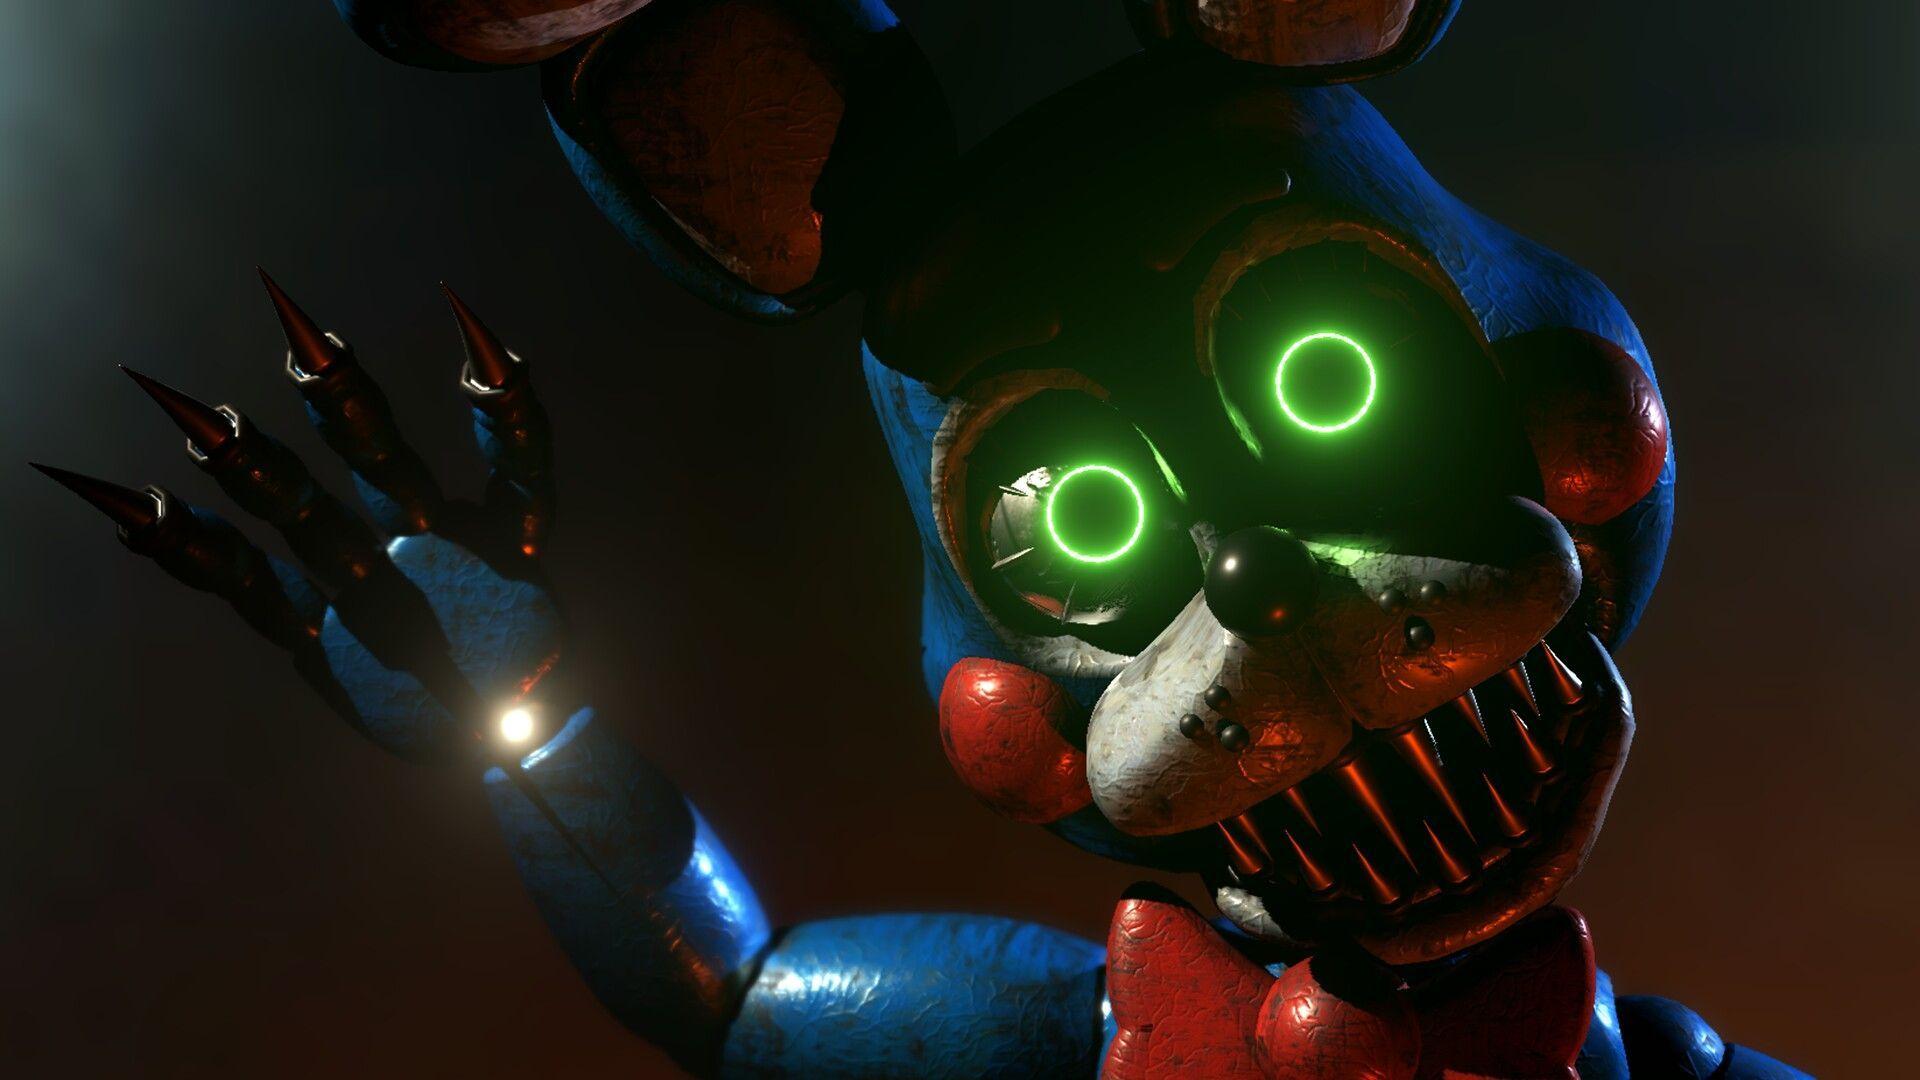 Nightmare Toy bonnie from a new fangame: Sinister Turmoil. FNAF